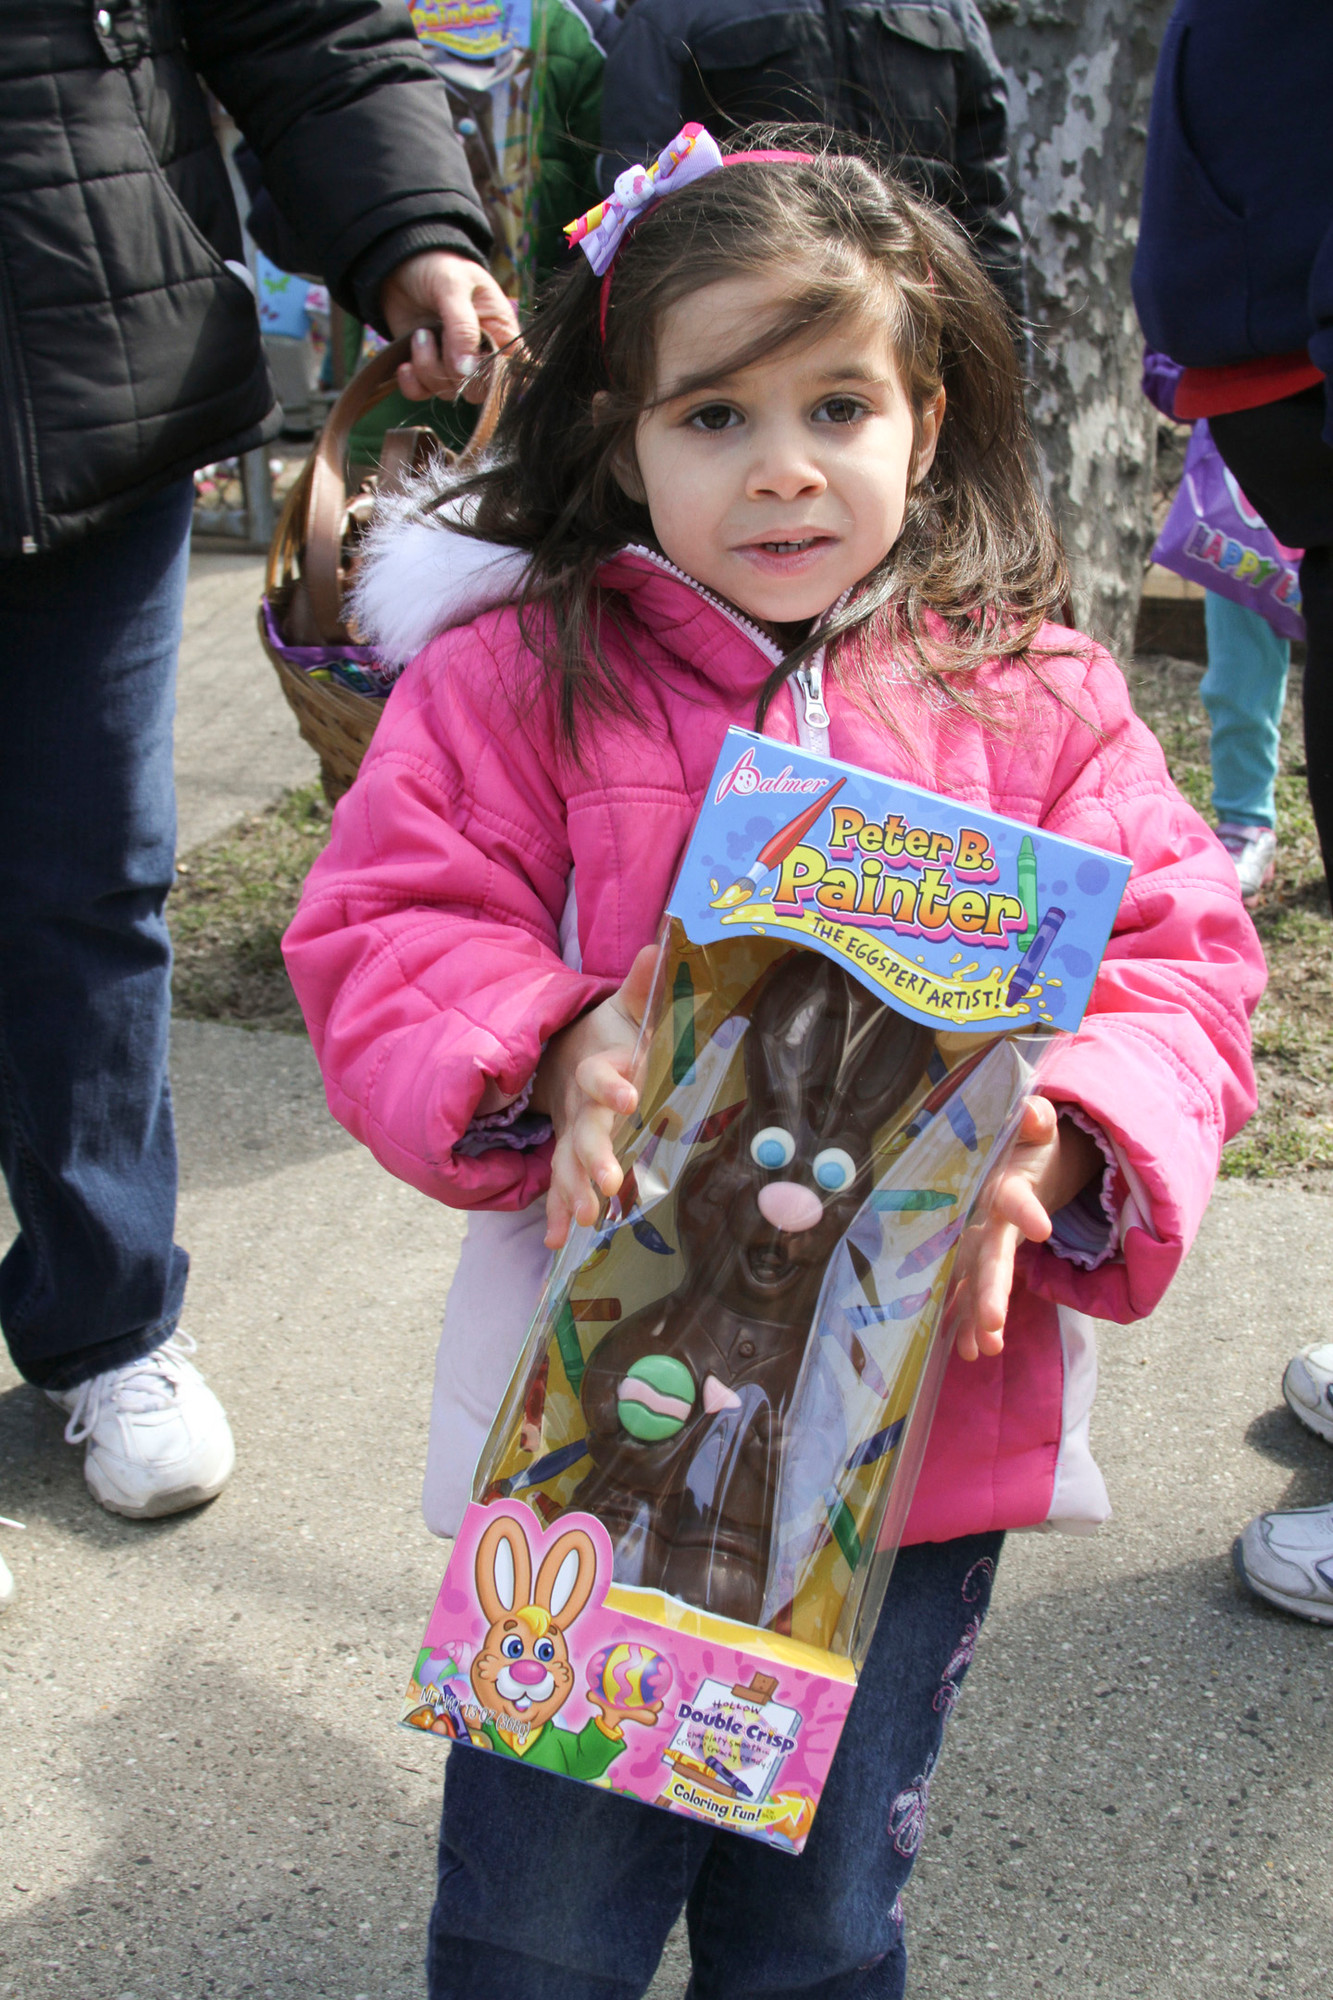 Kayla Sagona, 3, won a giant chocolate rabbit after she found one of the golden eggs.